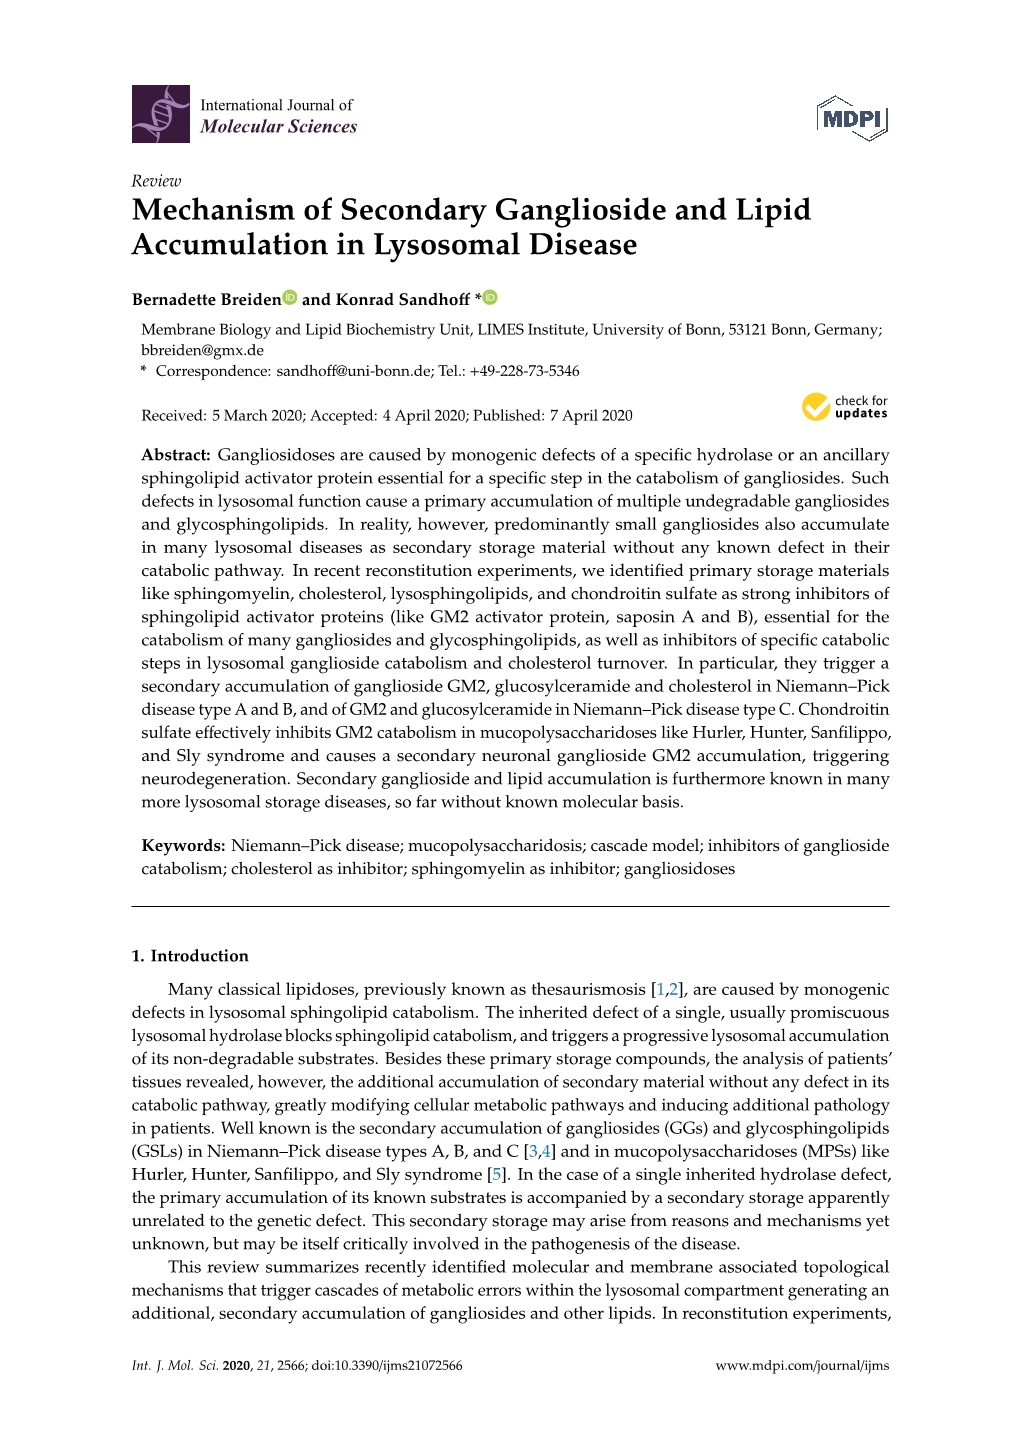 Mechanism of Secondary Ganglioside and Lipid Accumulation in Lysosomal Disease